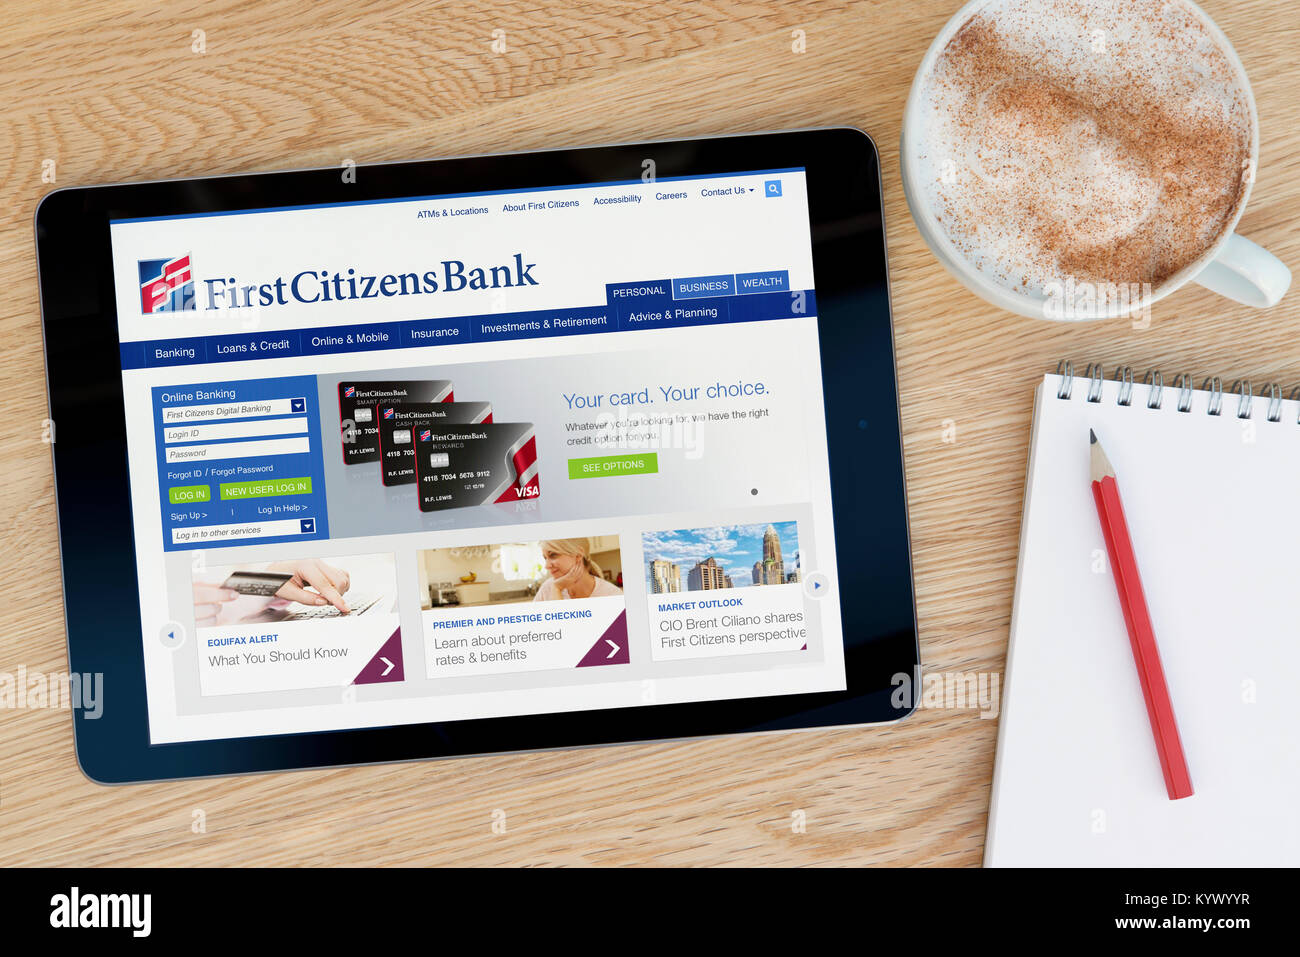 The First Citizens Bank website on an iPad tablet, on a wooden table beside a notepad, pencil and cup of coffee (Editorial only) Stock Photo